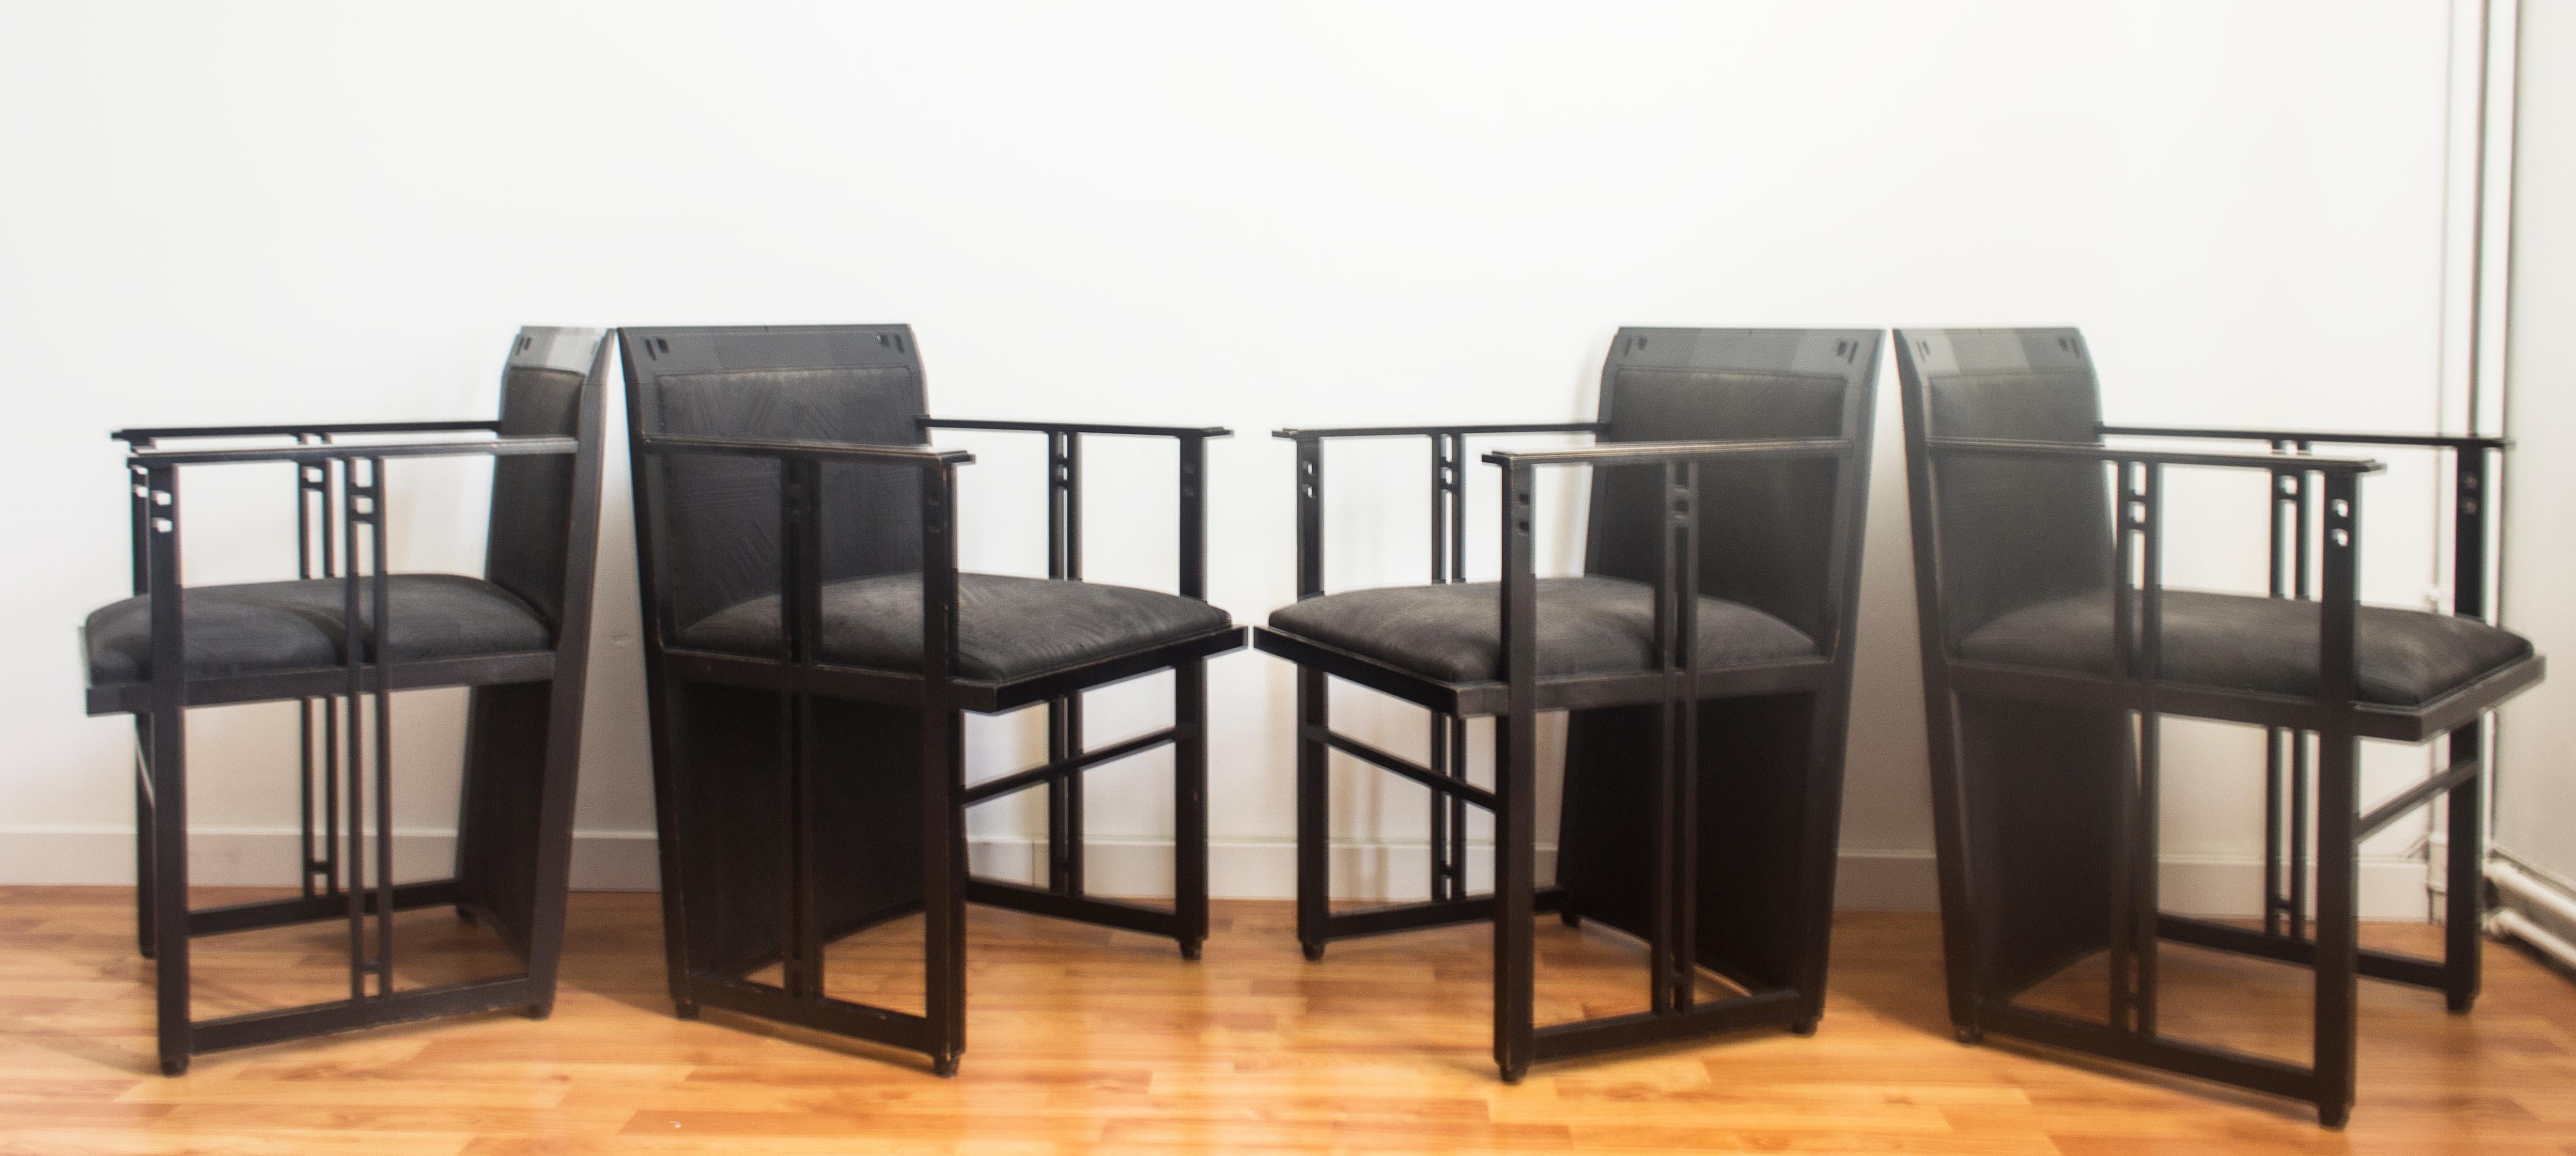 Polished 1980s Umberto Asnago 'Galaxy' Chairs for Giorgetti For Sale